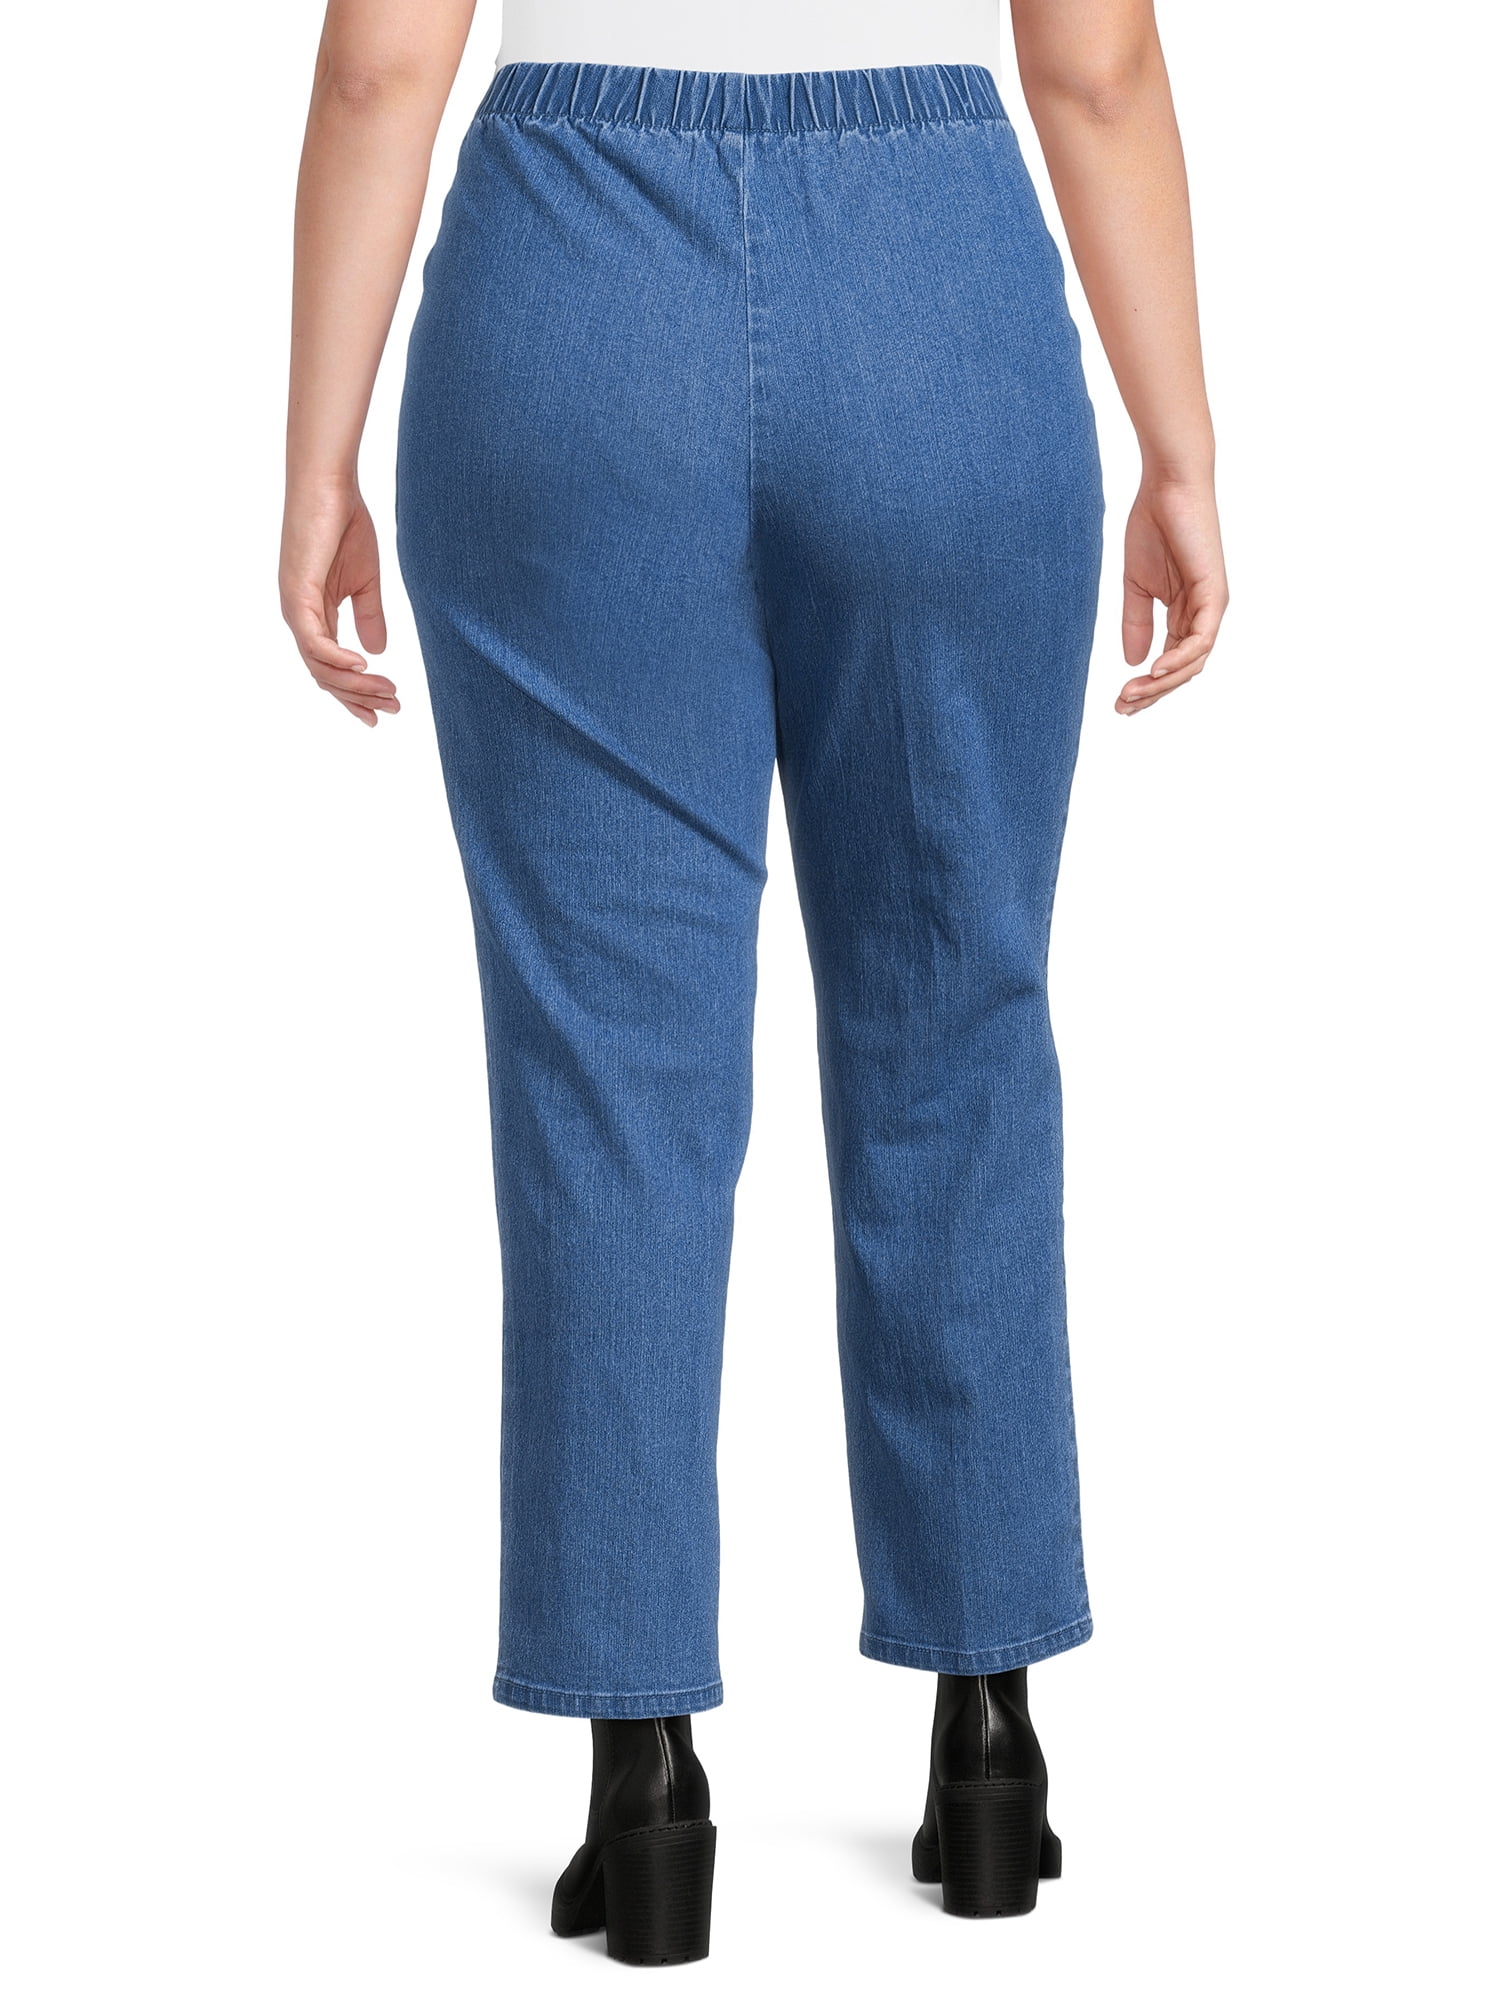 Just My Size Women's Plus-Size Pull-on Stretch Woven Pants Size 4X Blue  Rinse